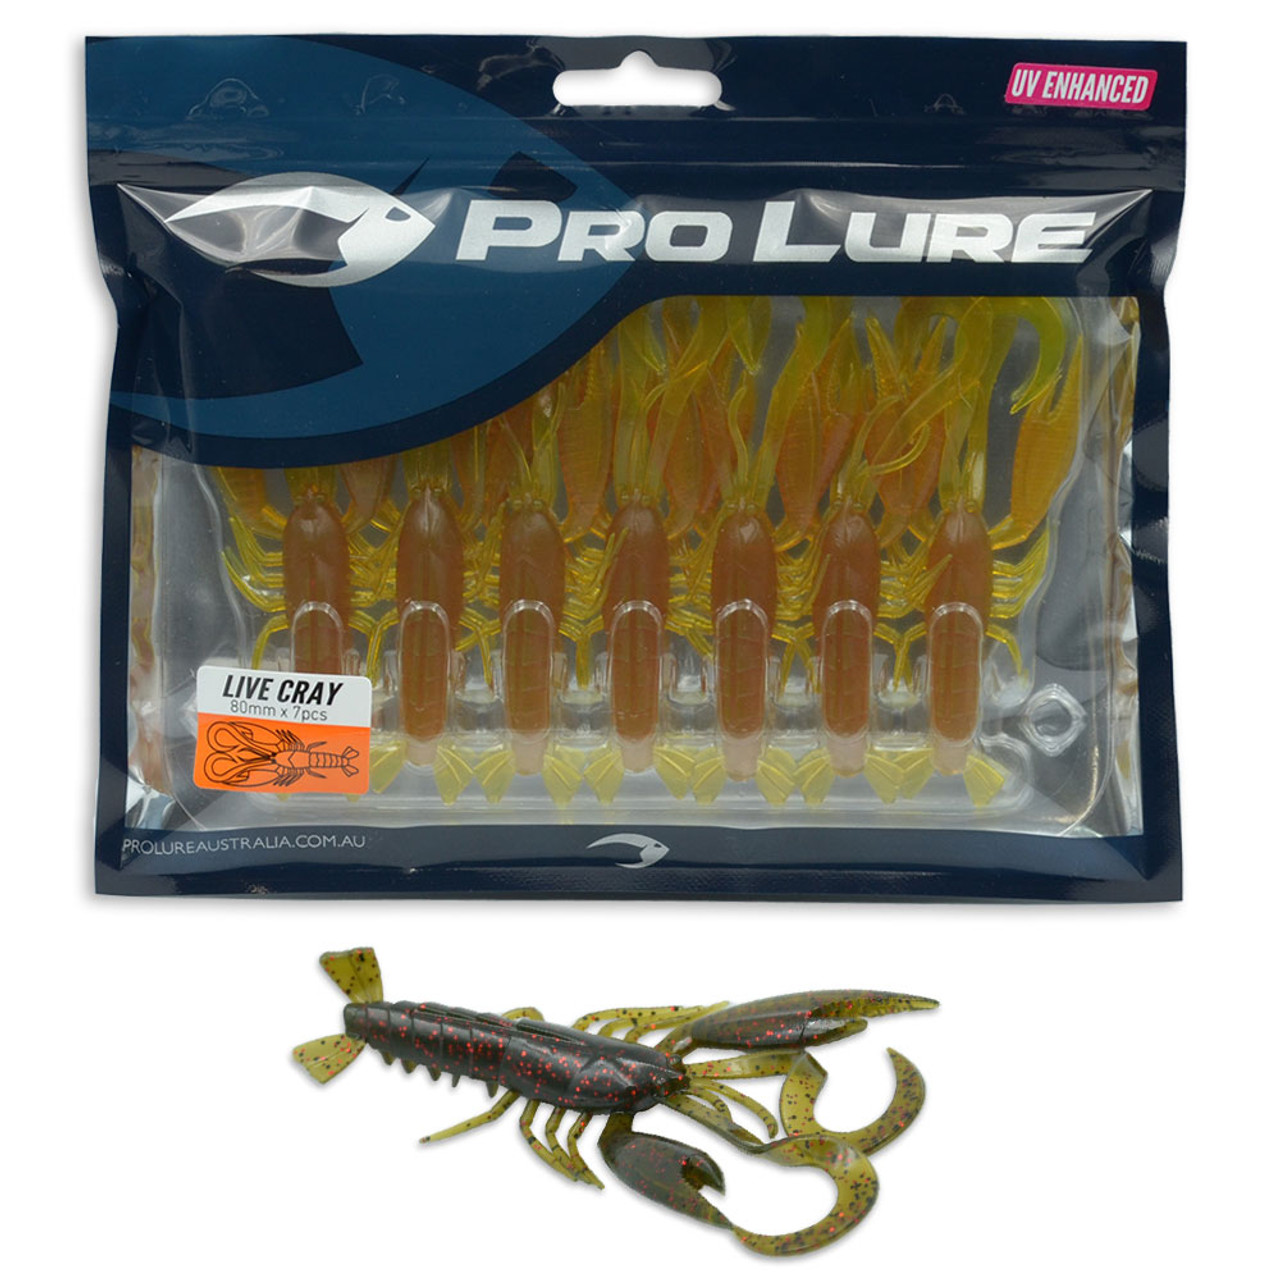 Pro Lure Live Cray Lures